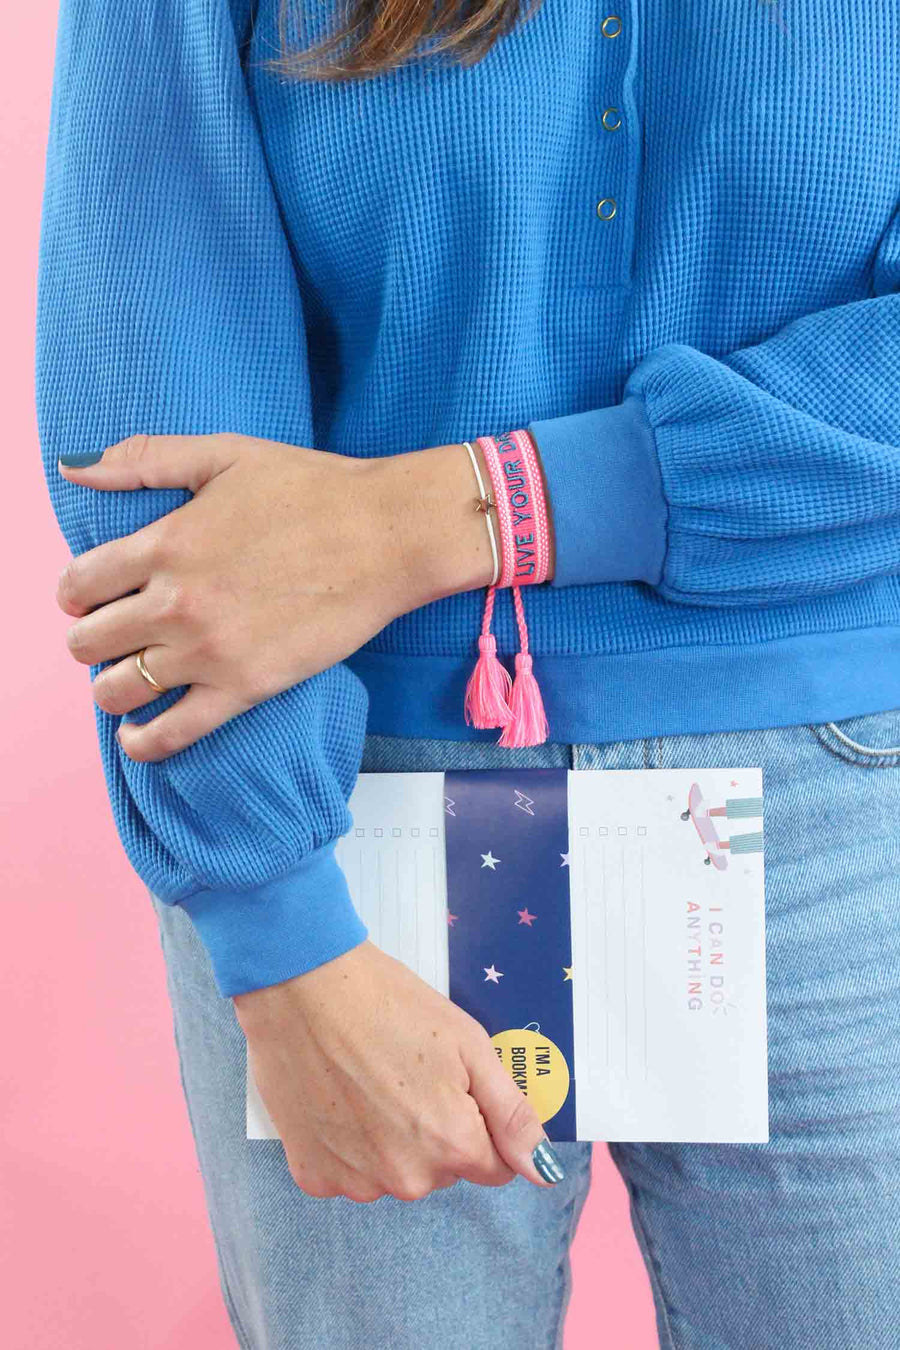 Live Your Dreams Armband - Woven Pink